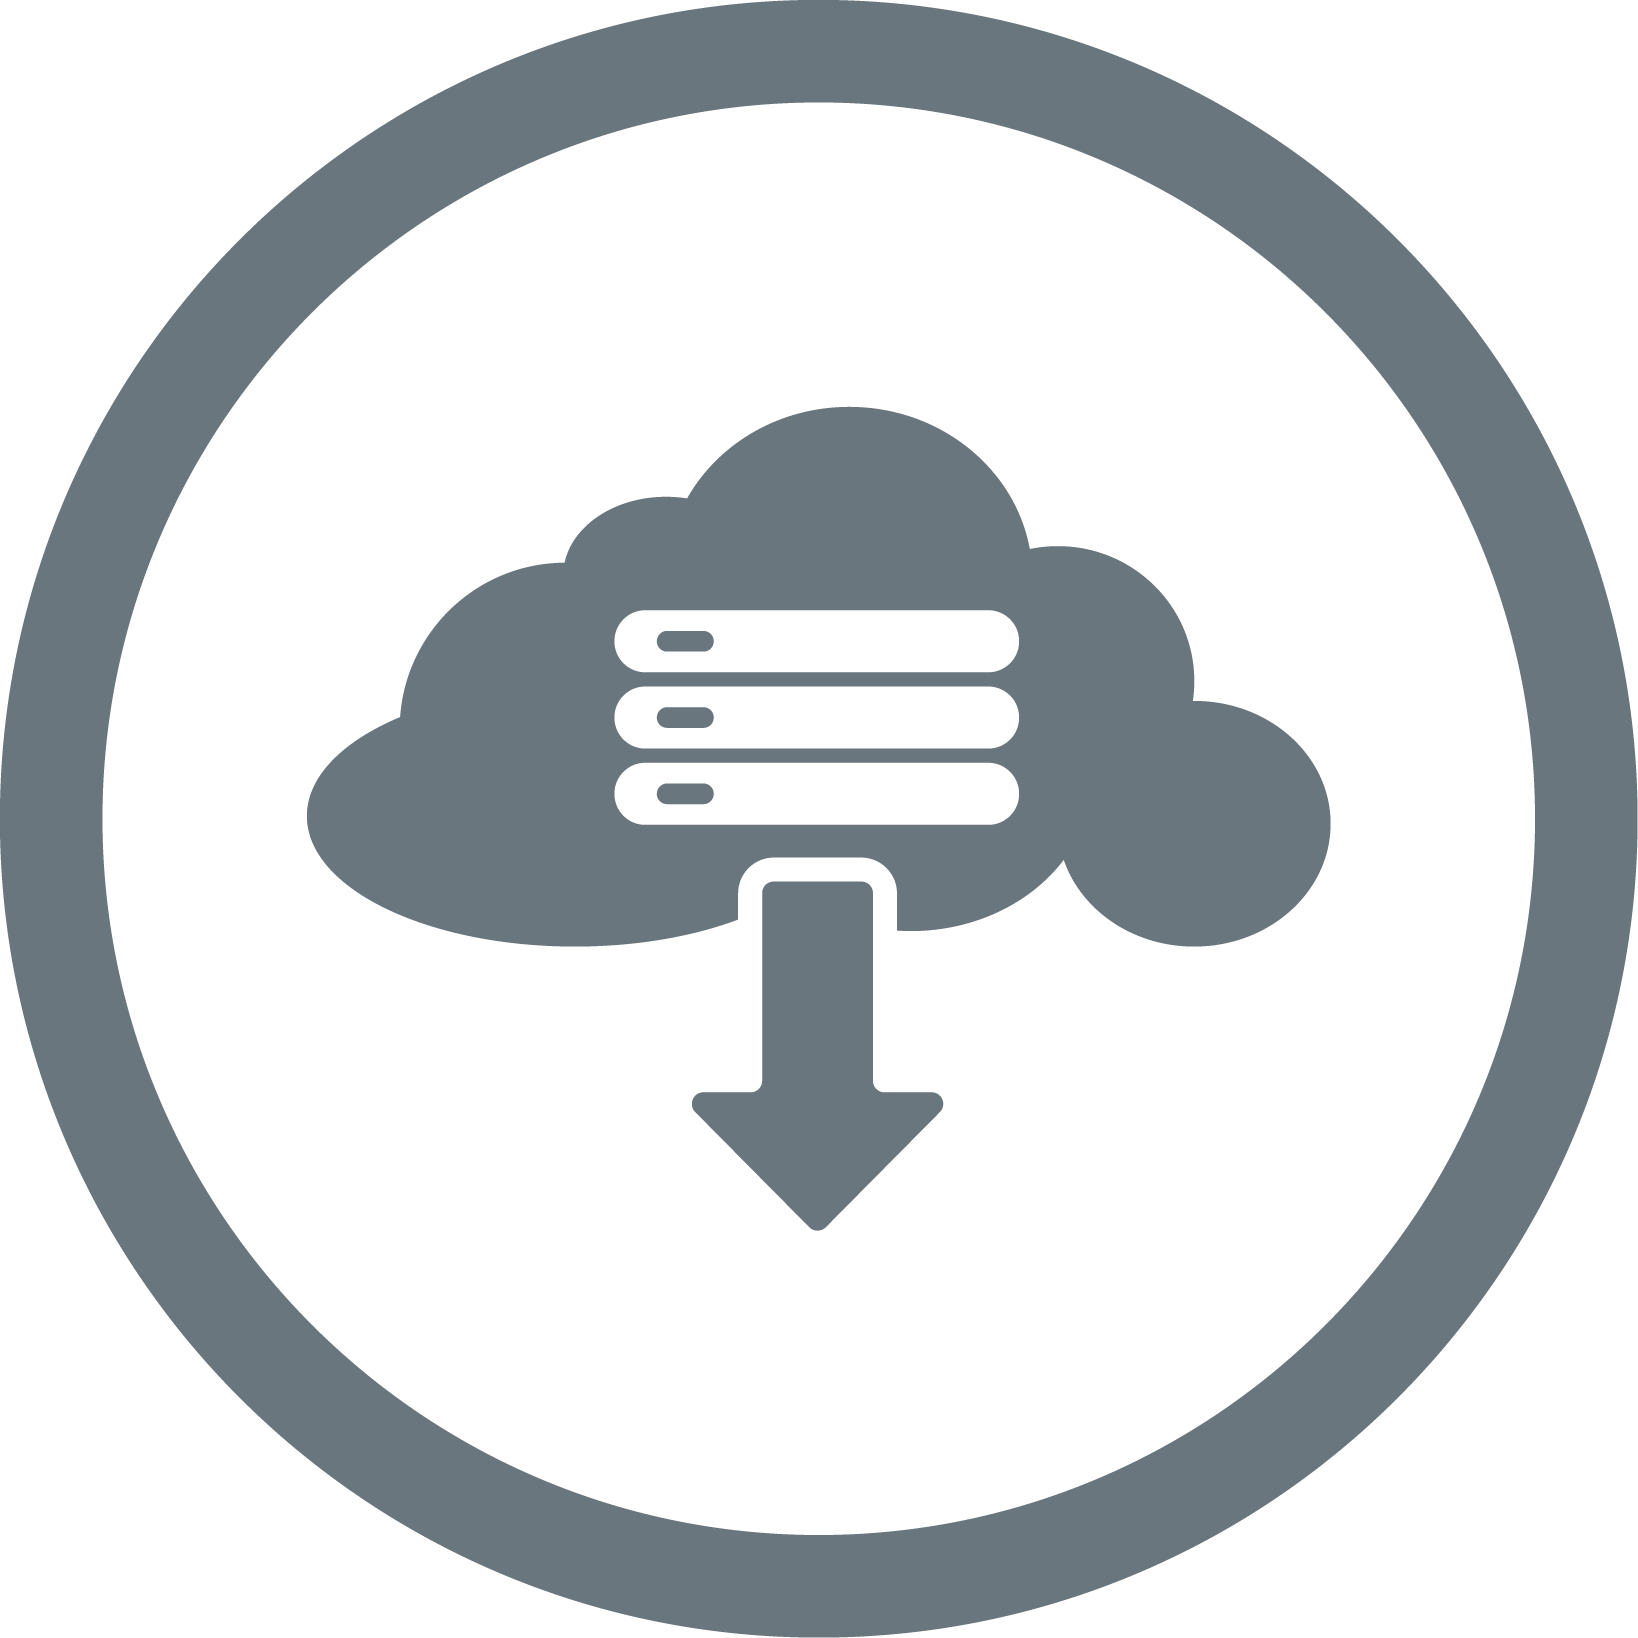 Consulting — Cloud Data Source Icon in Asbury Park, NJ